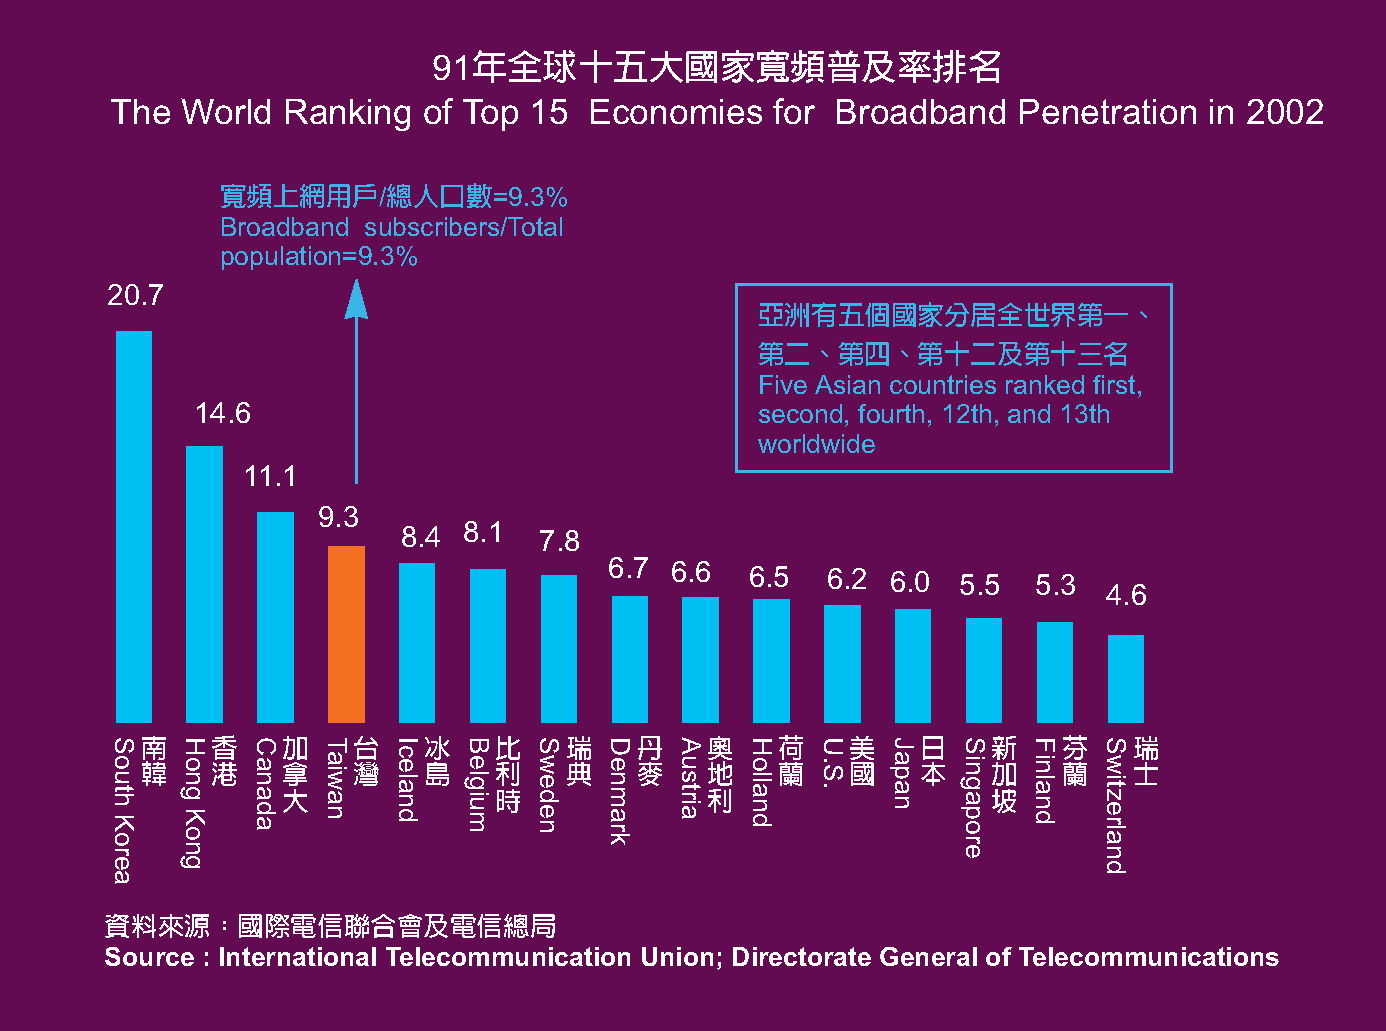 The World Ranking of Top 15 Economies for Broadband Penetration in 2002